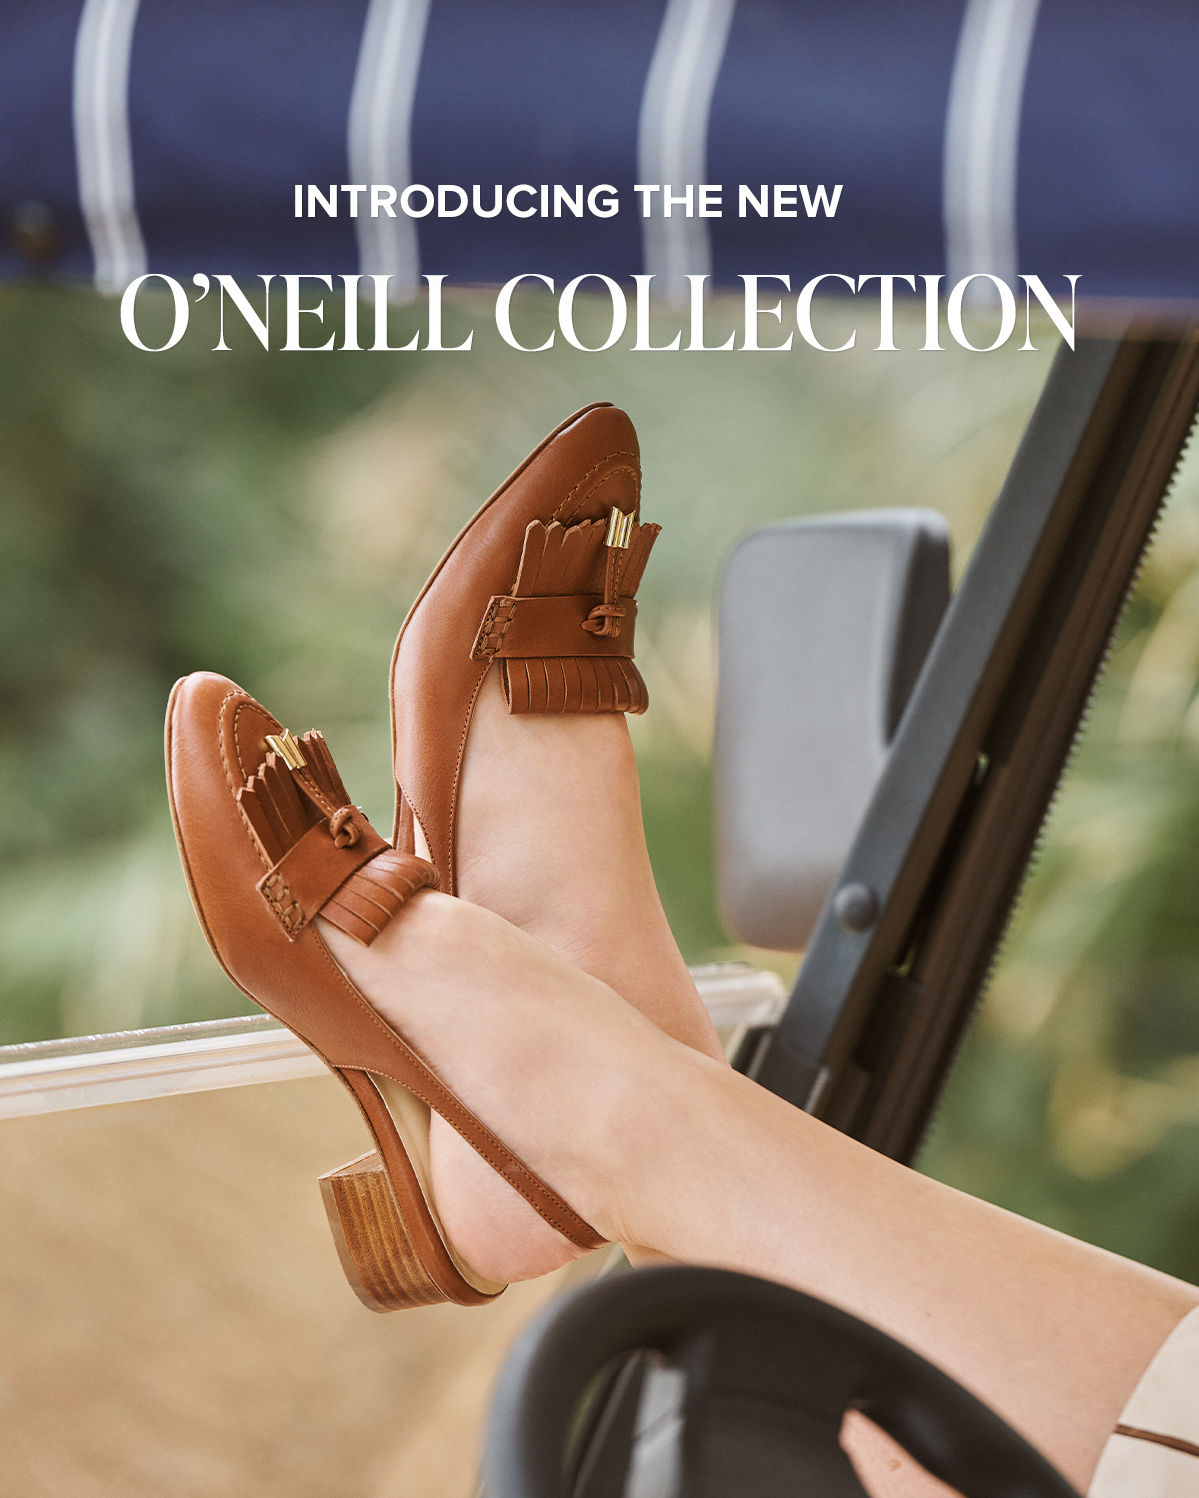 INTRODUCING THE NEW O'NEILL COLLECTION